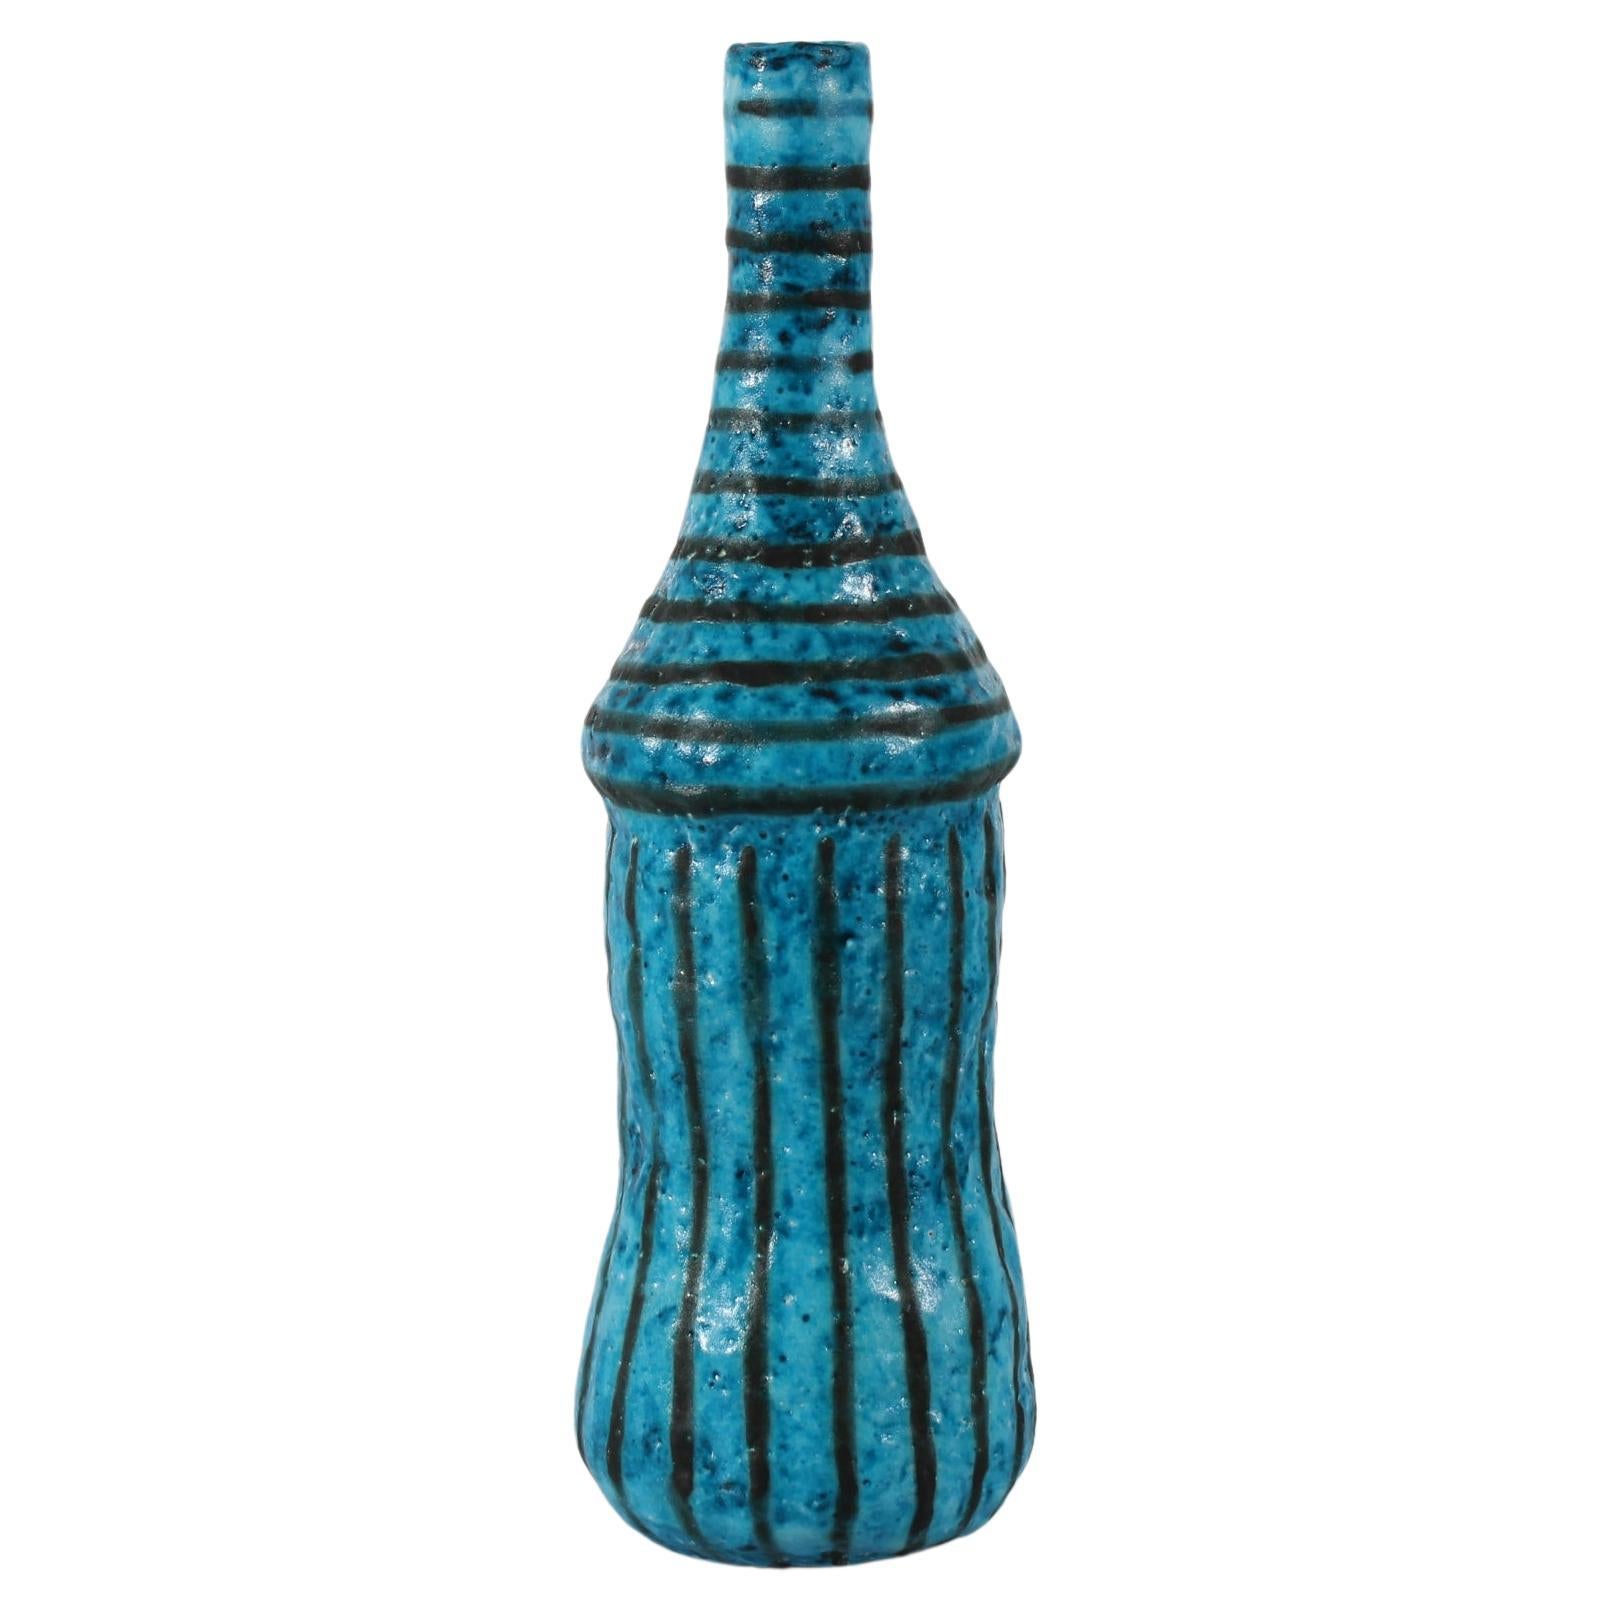 Guido Gambone Tall Artistic Bottle Vase Blue + Black Stripes Made in Italy 1950s For Sale